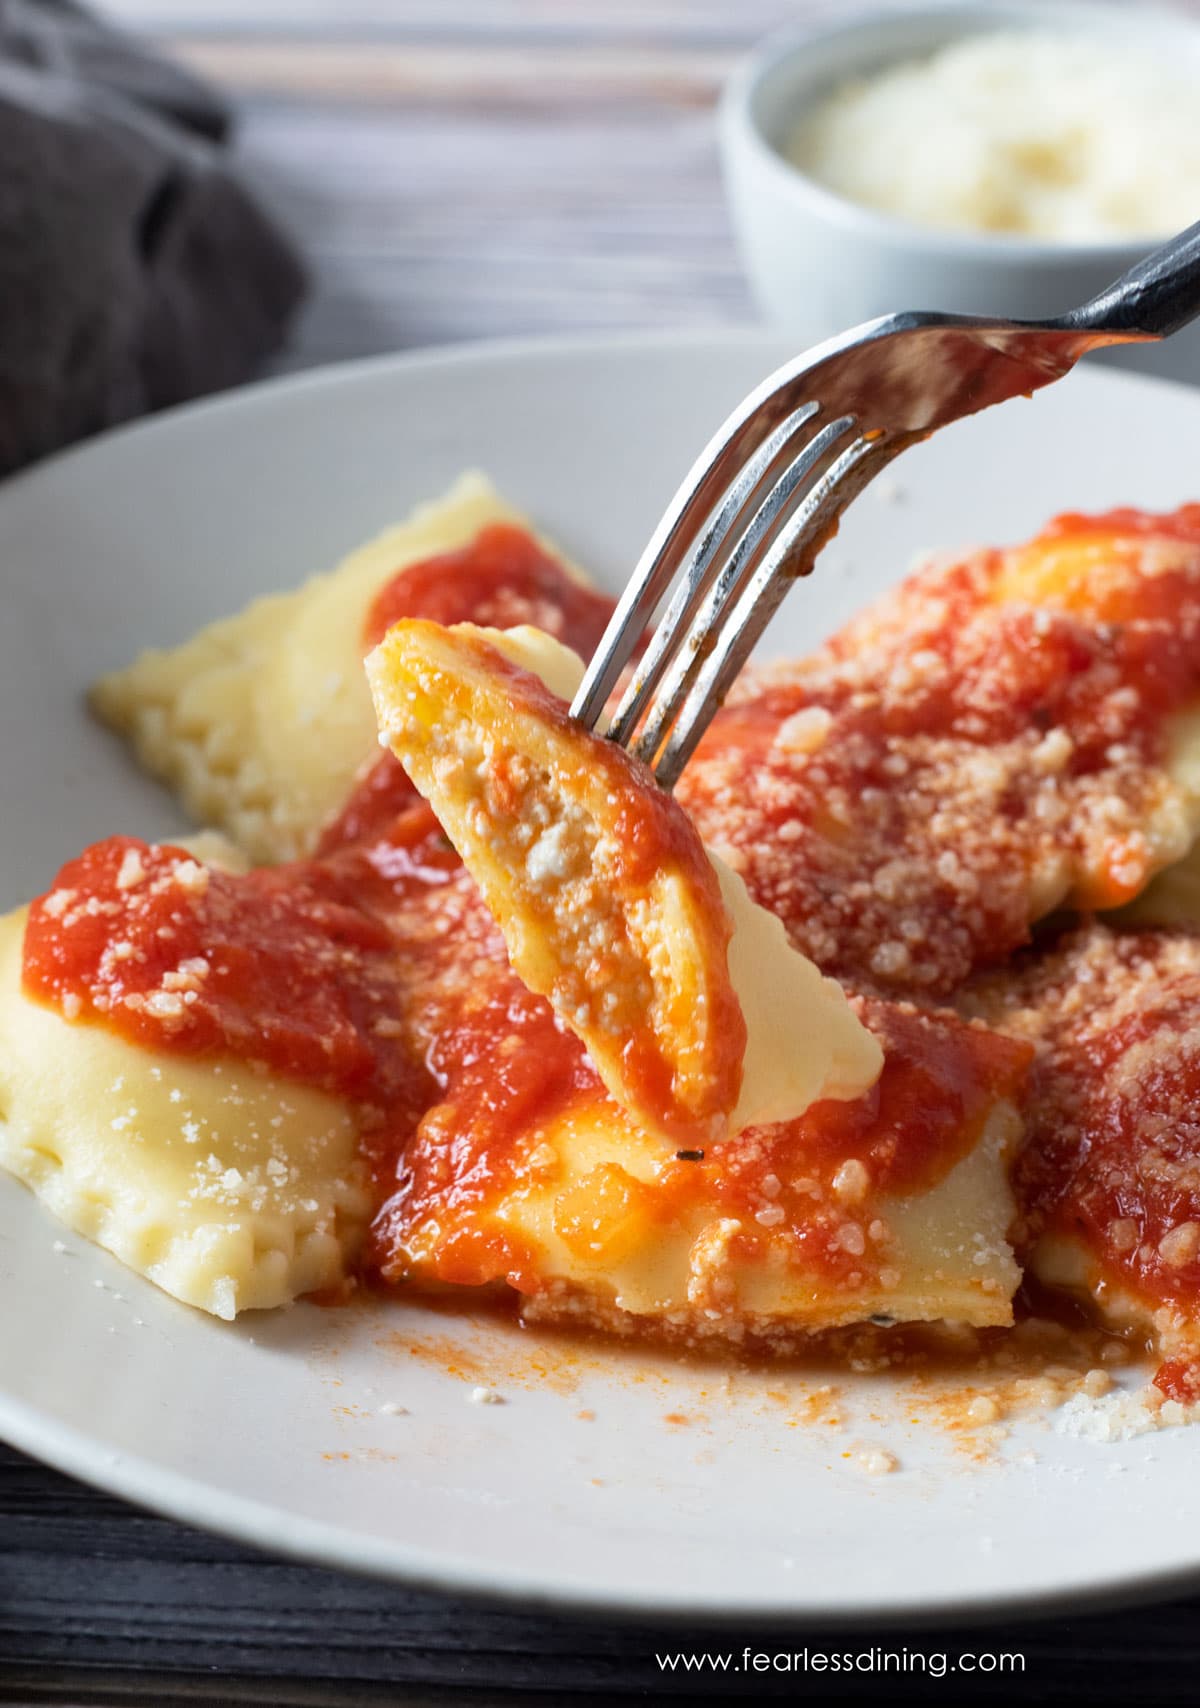 A slice of gluten free ravioli so you can see the ricotta filling inside.